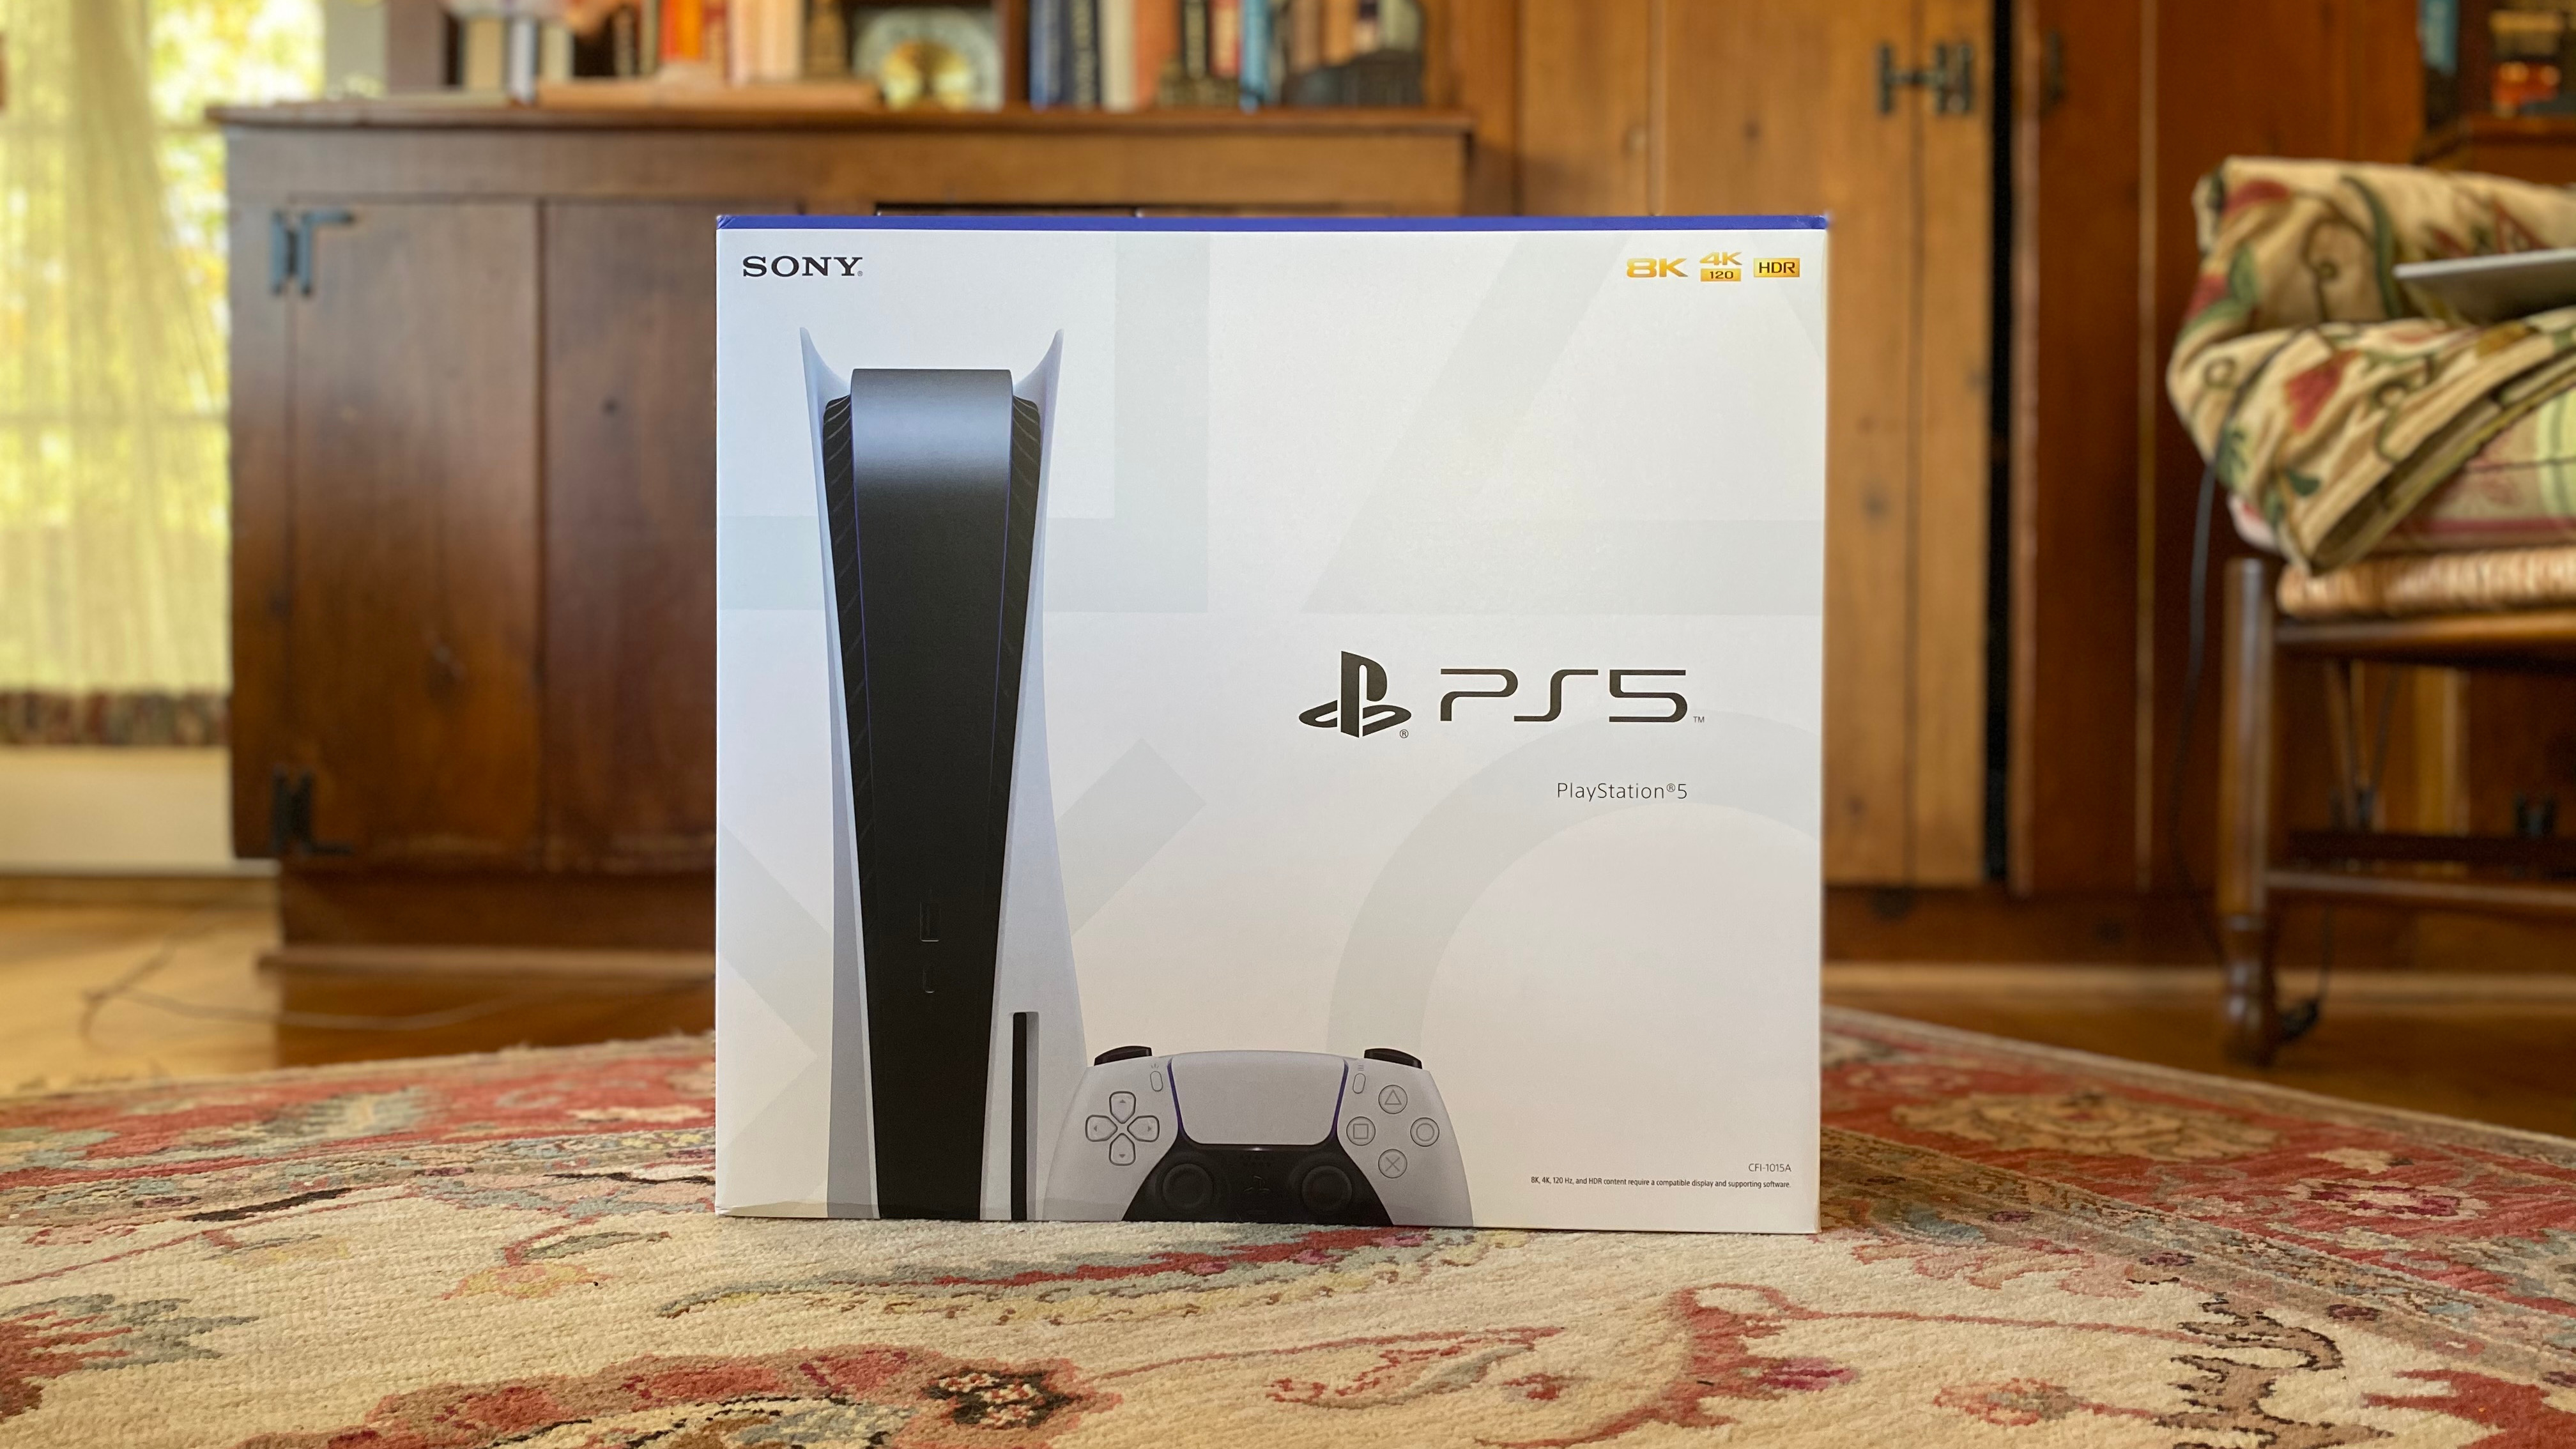 Ps5 In Box / Ps5 Fans Are Having Fun Imagining The Console ...